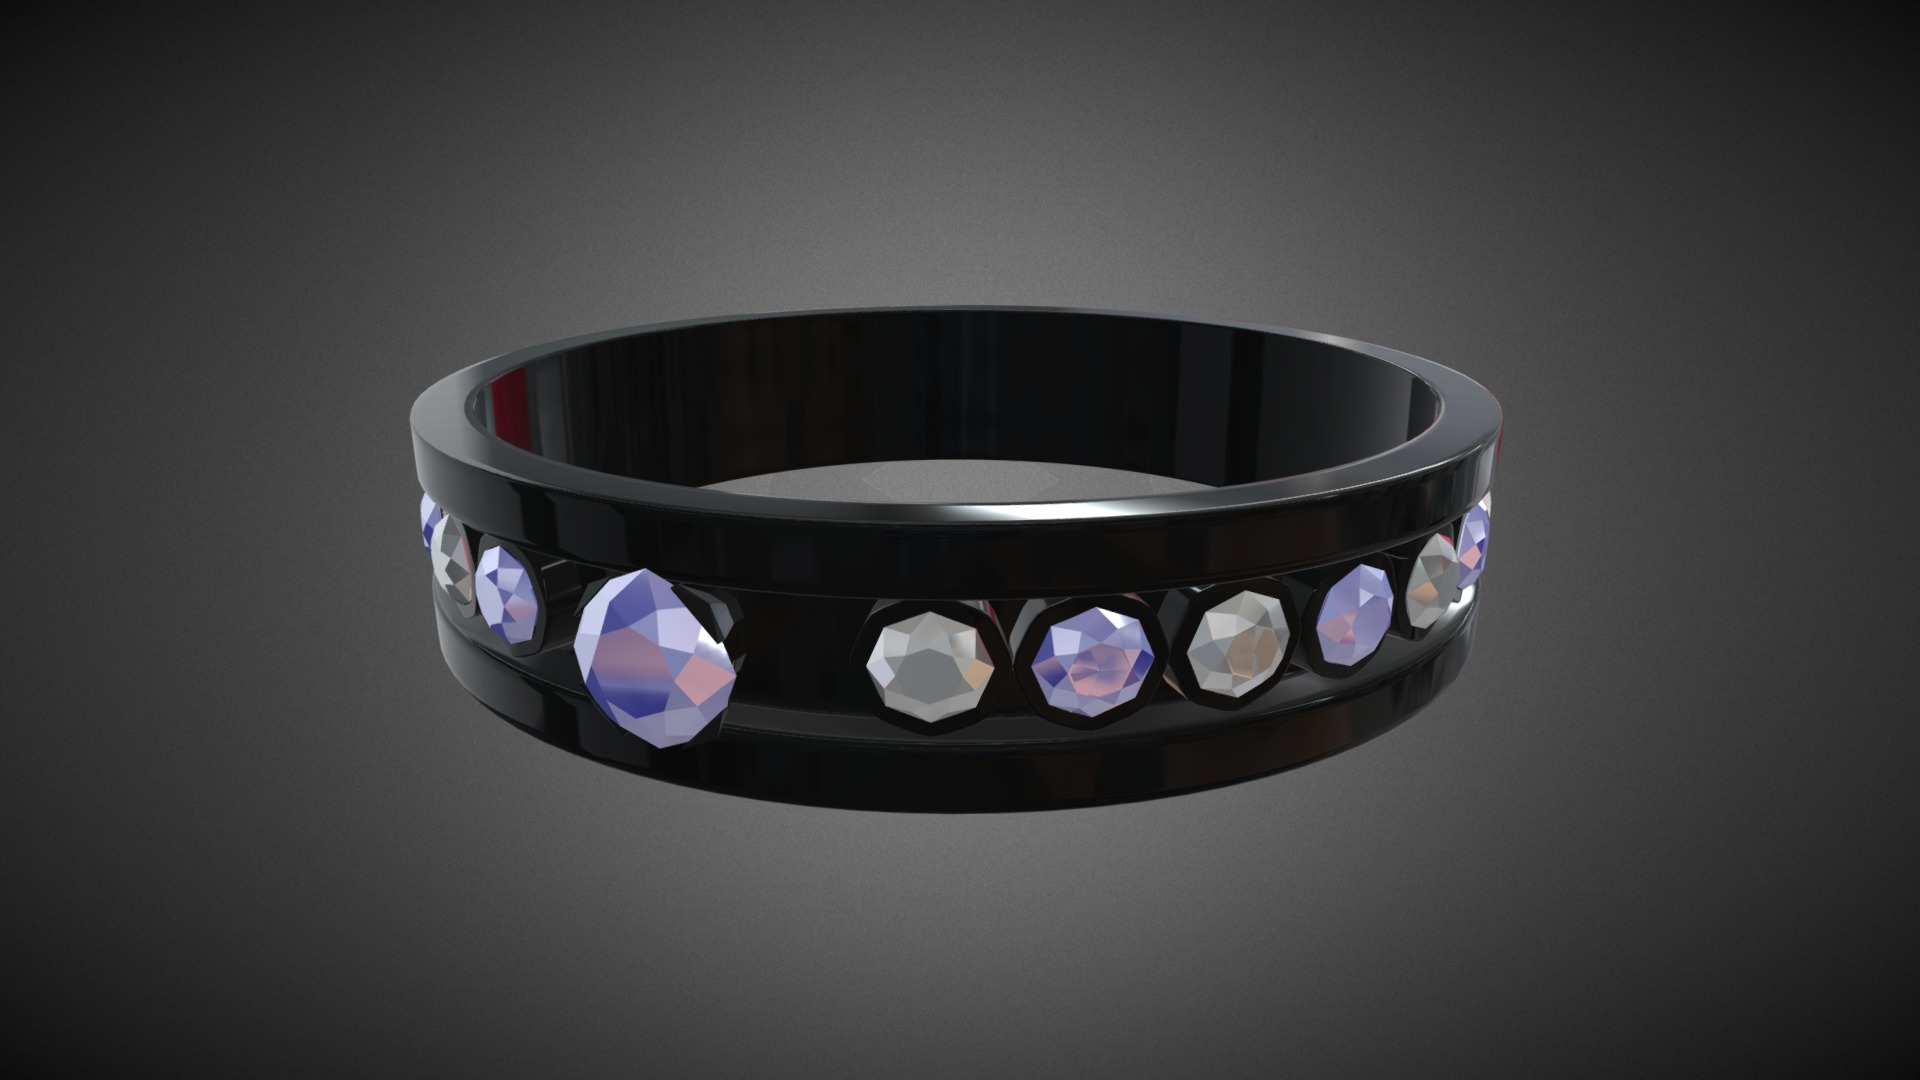 3D model Gemstone Ring - This is a 3D model of the Gemstone Ring. The 3D model is about a ring with a colorful design.